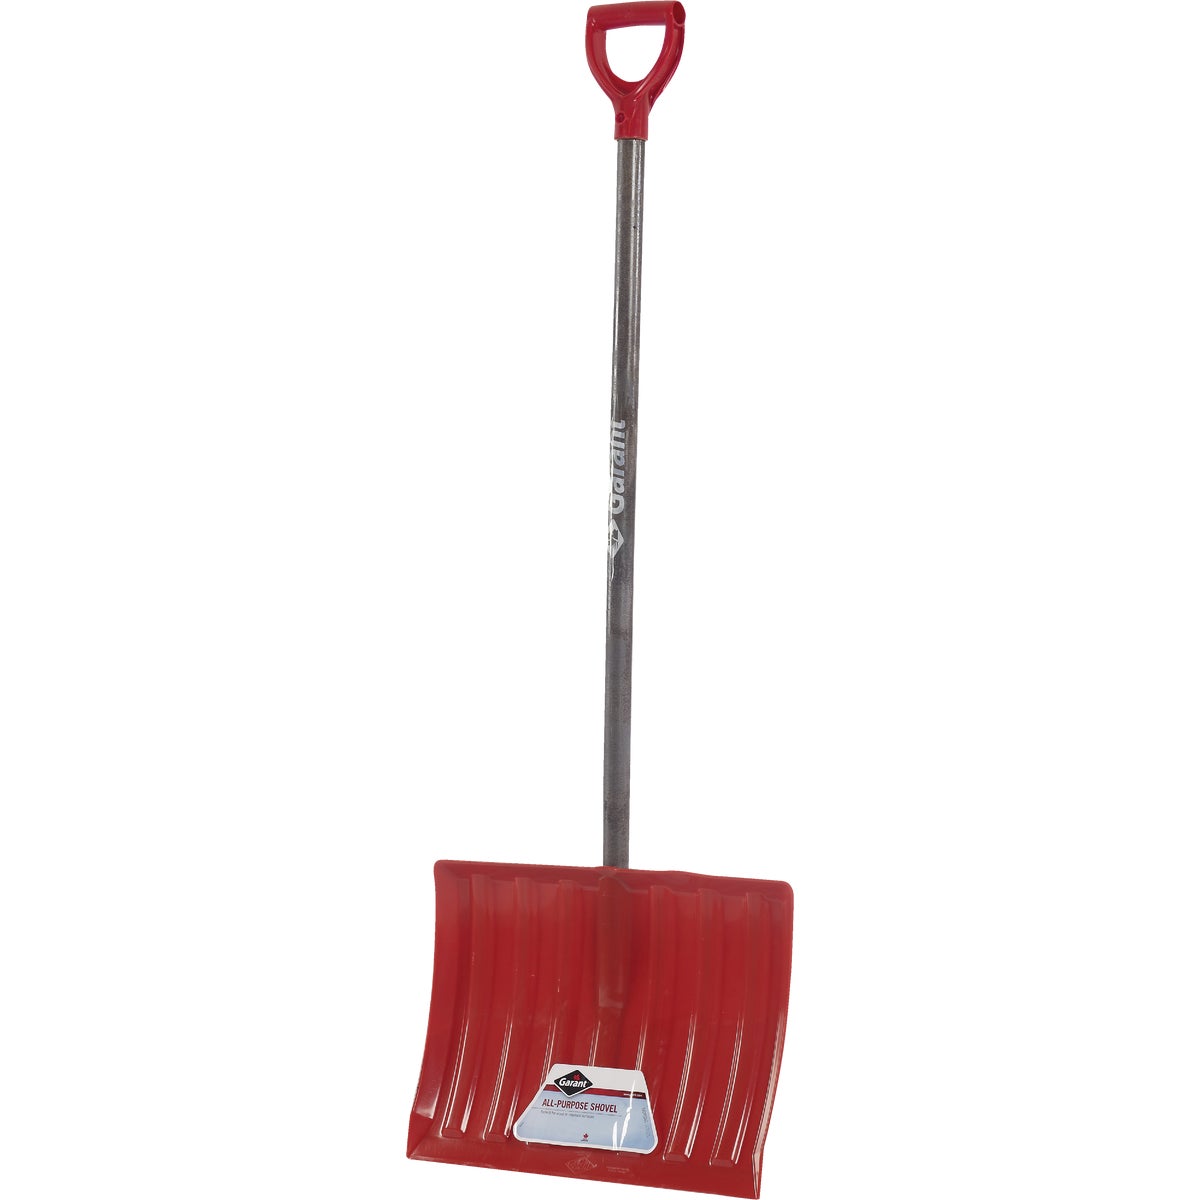 Item 702557, Nordic label. Poly shovel with a 18 In. x 13.25 blade and a 42.